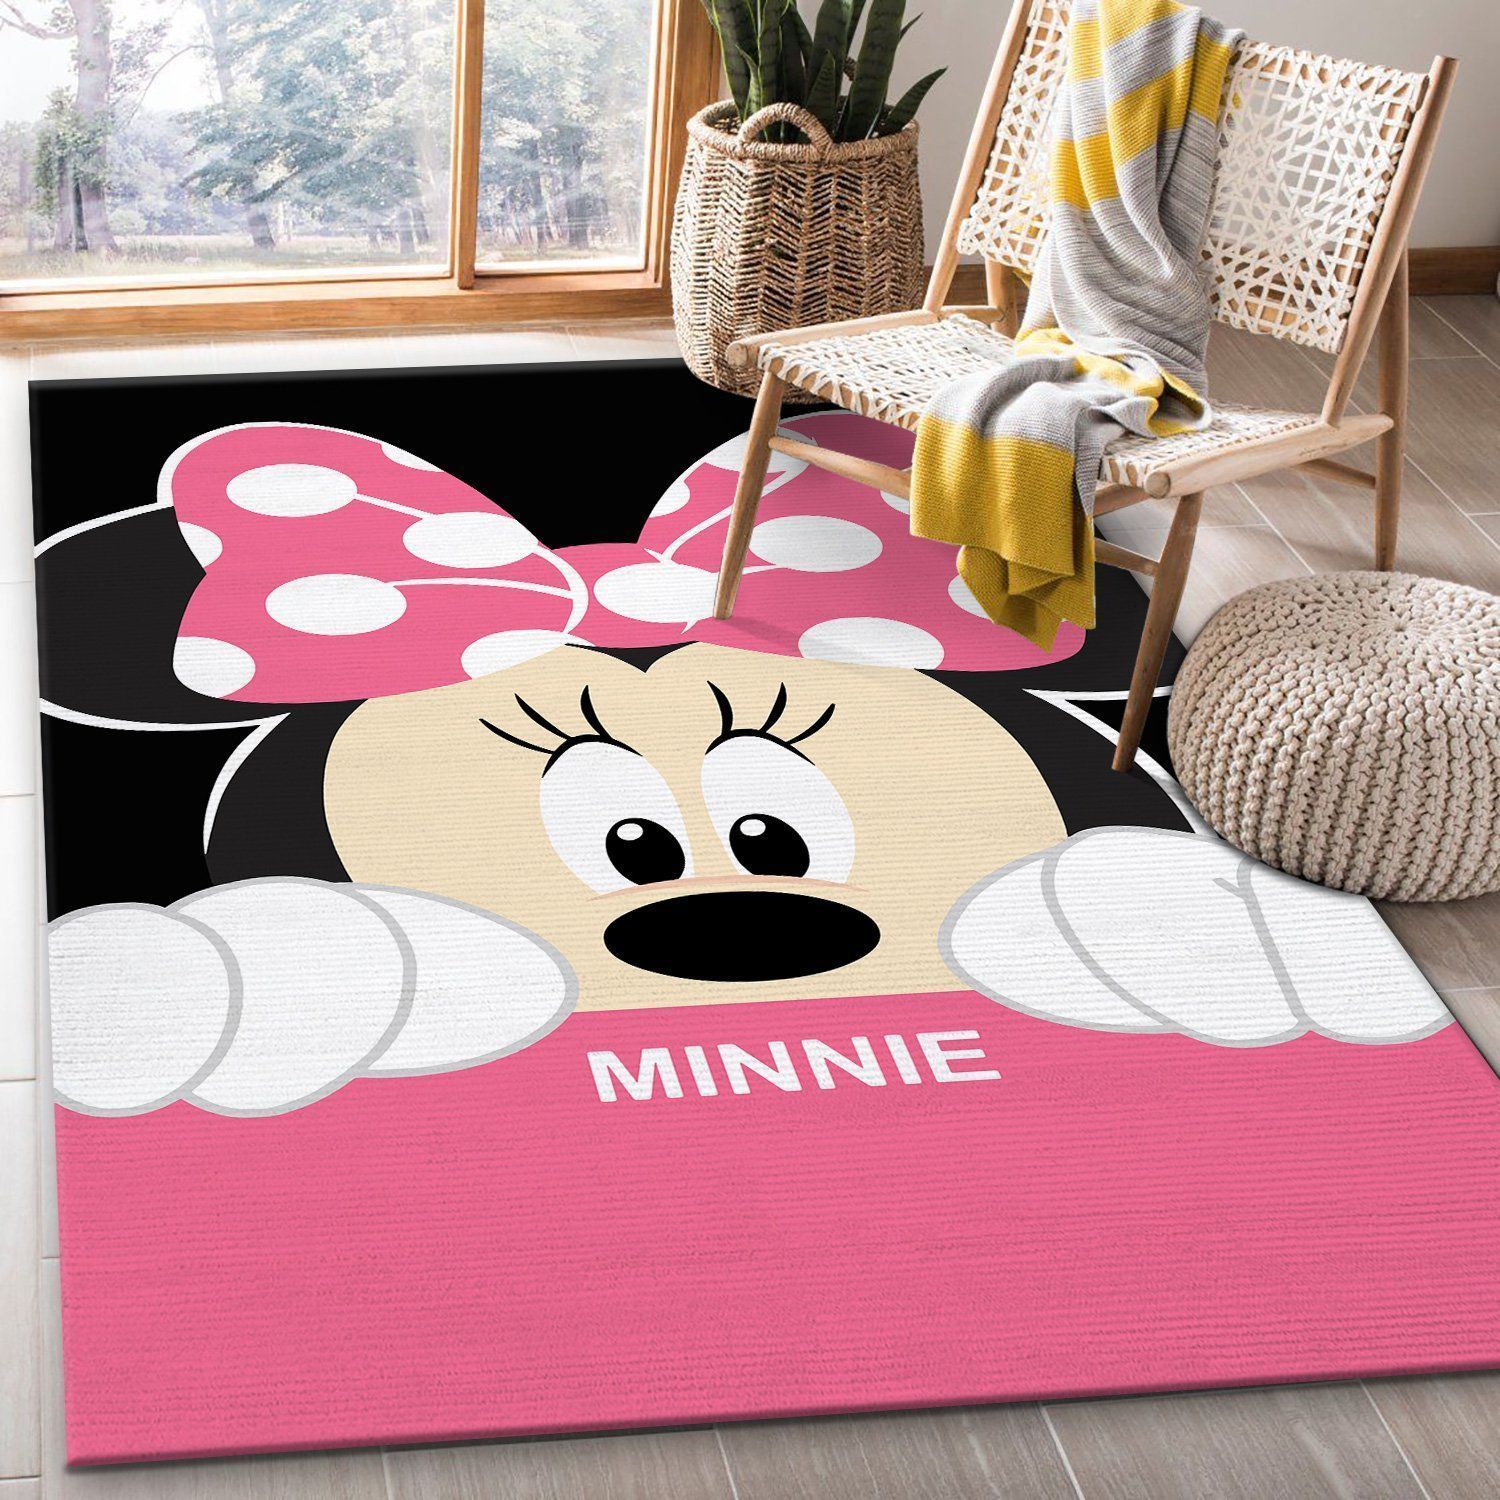 Minnie Mouse Area Rugs Disney Movies Living Room Carpet Local Brands Floor Decor The US Decor - Indoor Outdoor Rugs 1